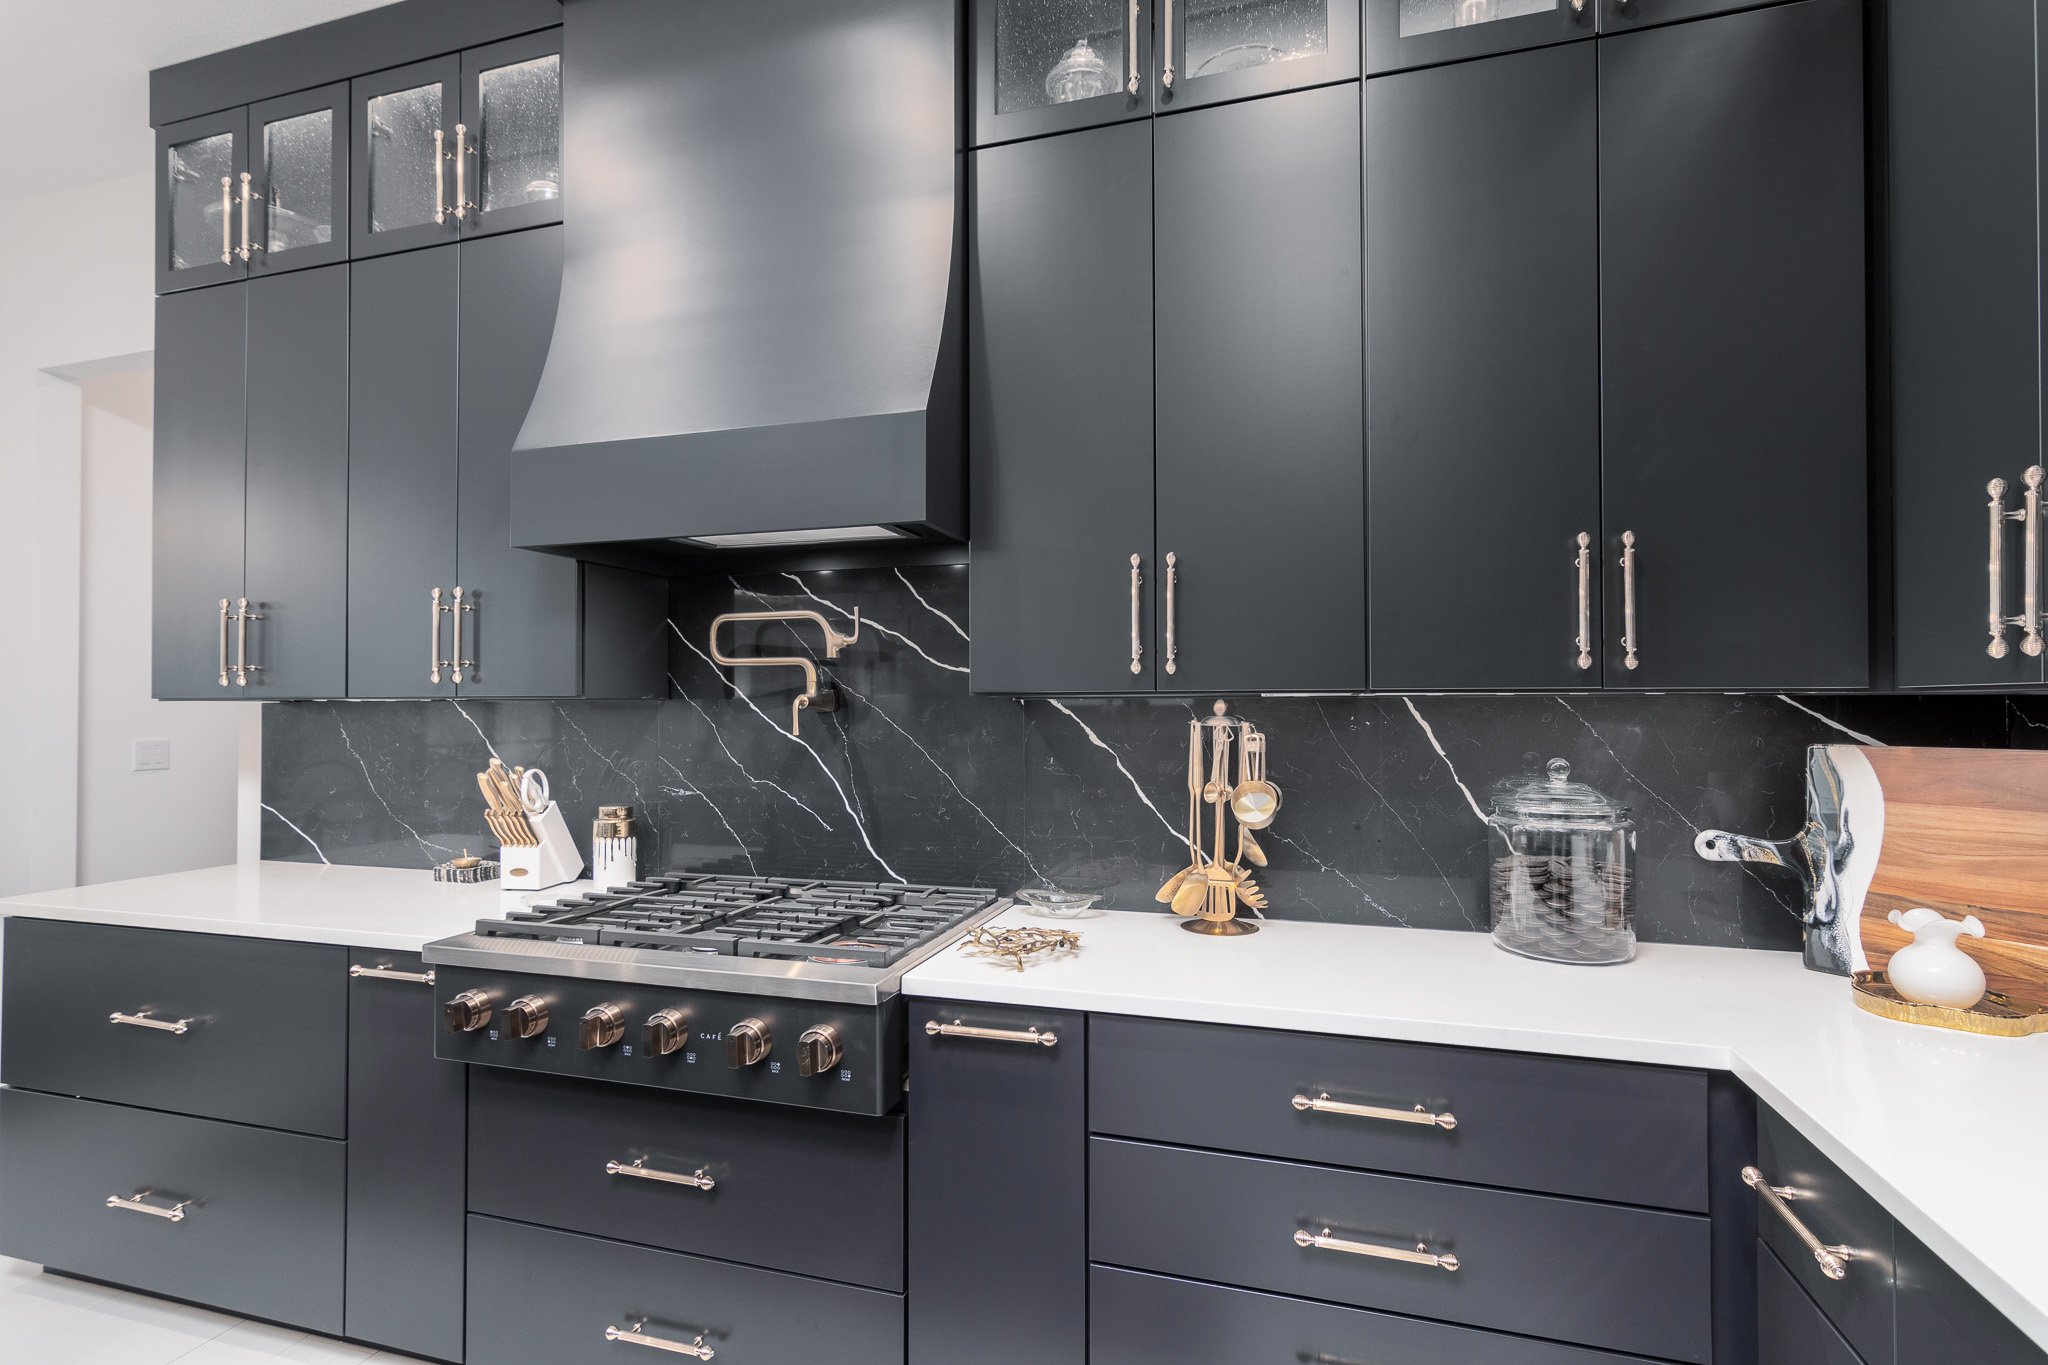 gas-stove-white-counter-black-cabinets.jpg